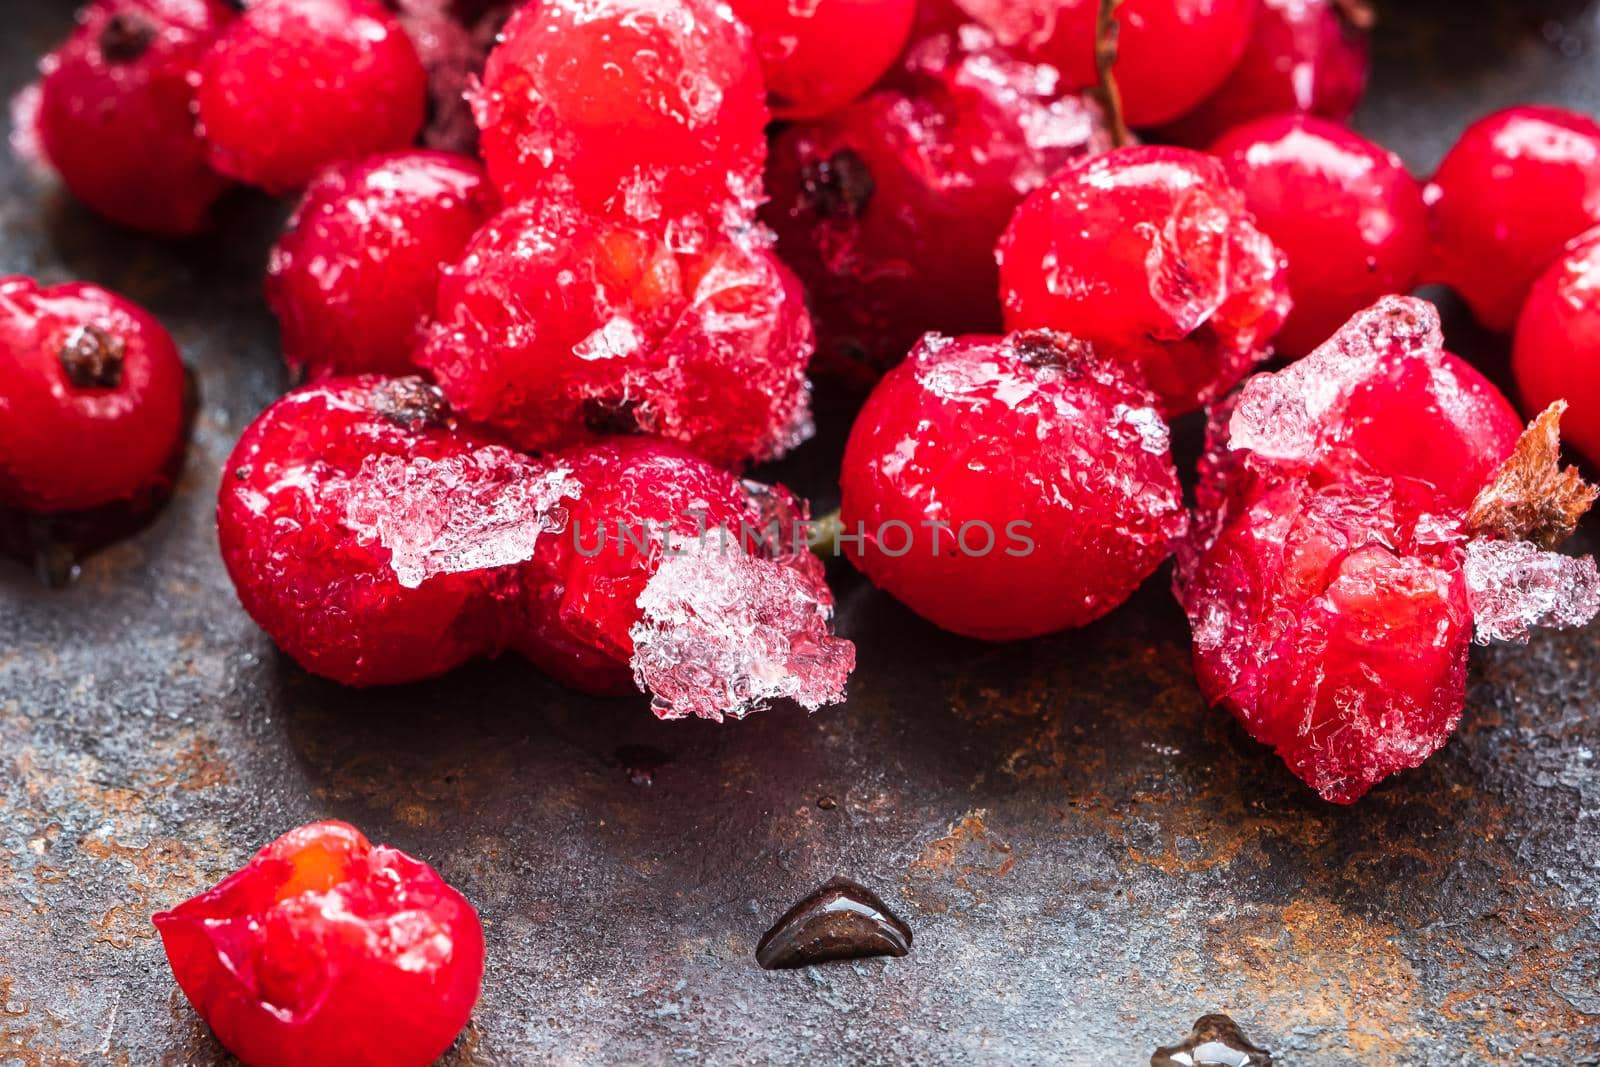 Frozen ice red currants pile lie on a rusty surface. horizontal orientation. close-up